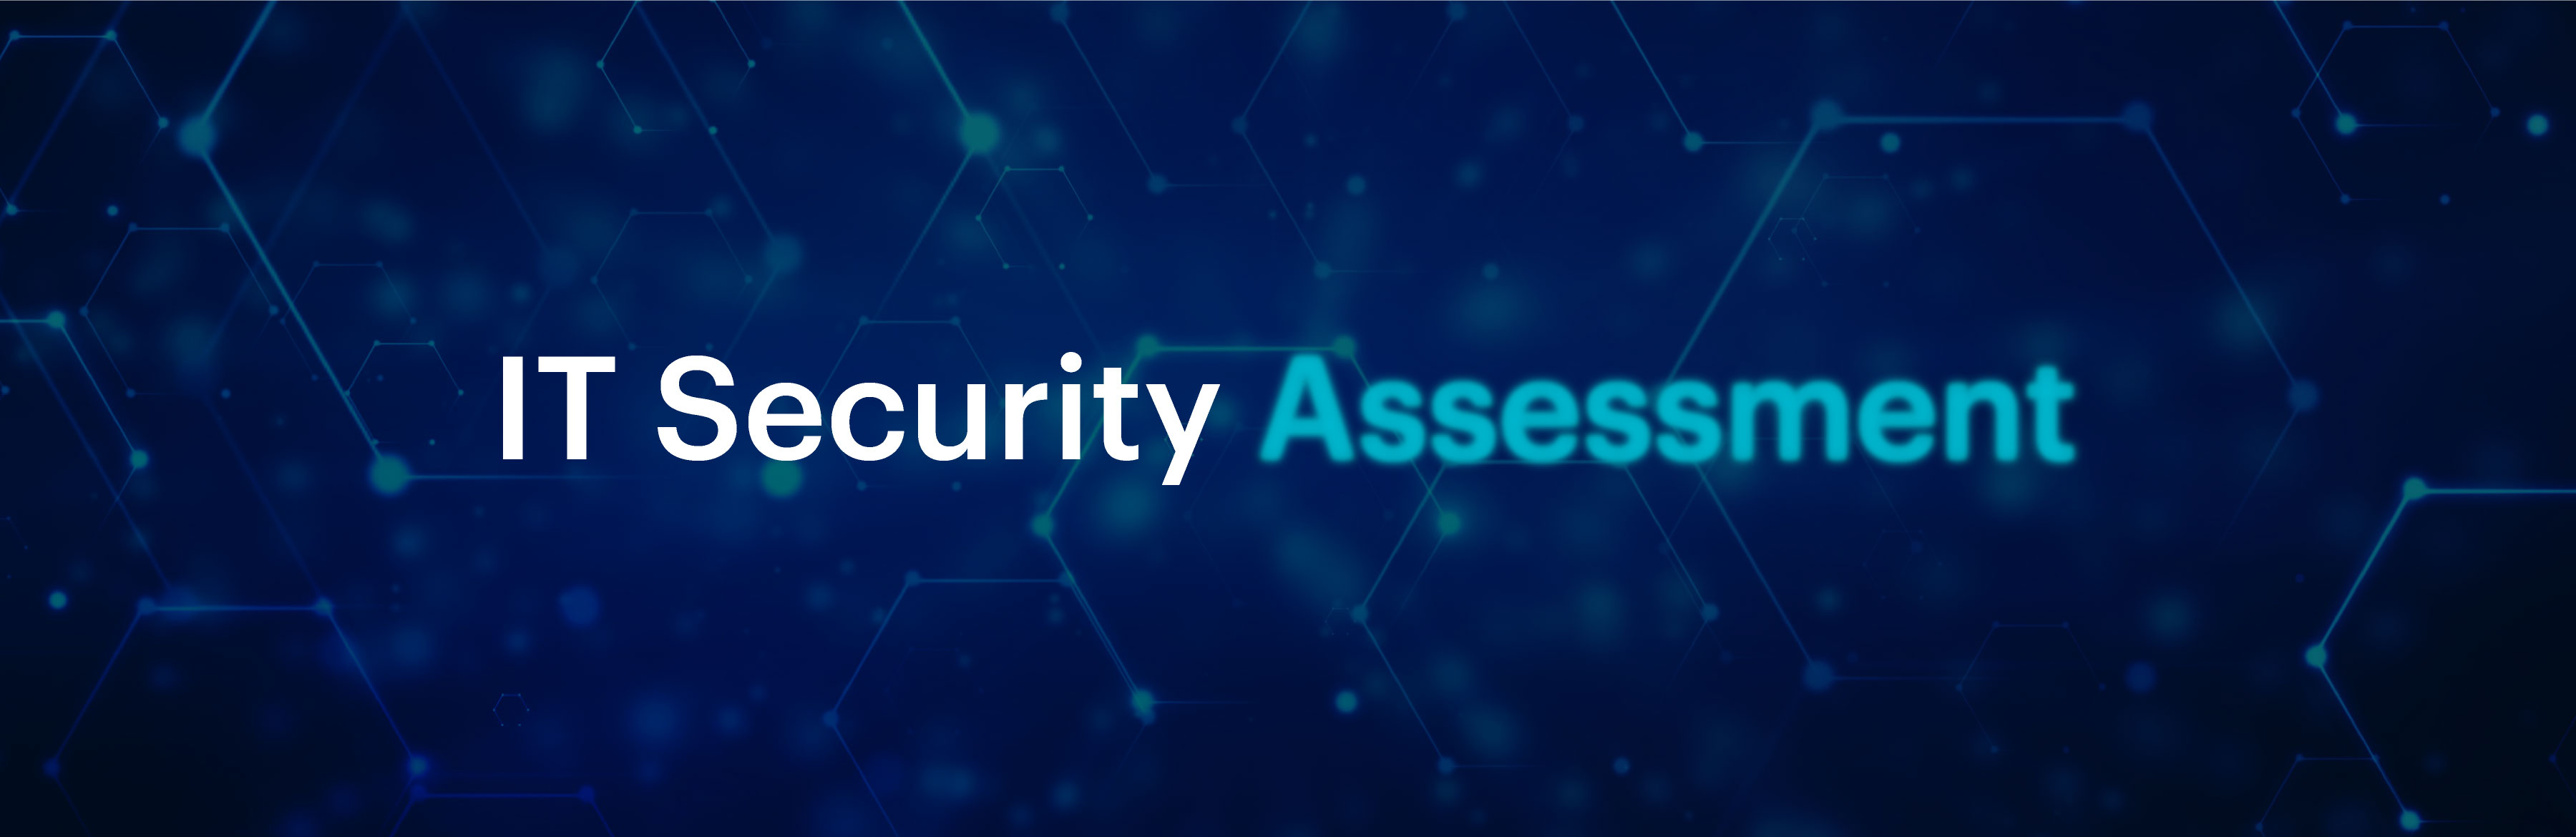 IT Security Assessment